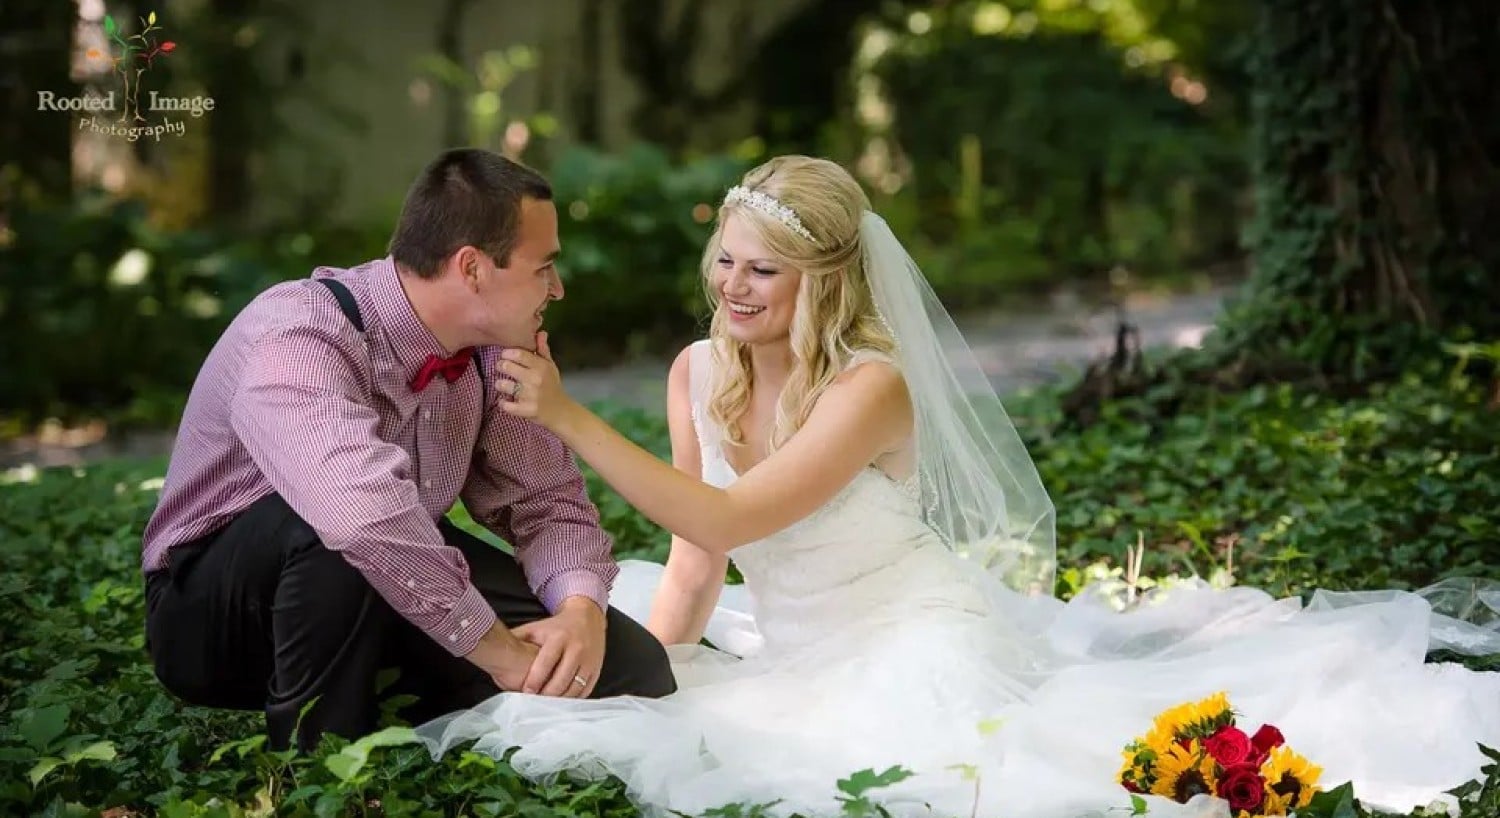 A bride and groom sitting on the ground together at the base of a tree surrounded by lush green leaves